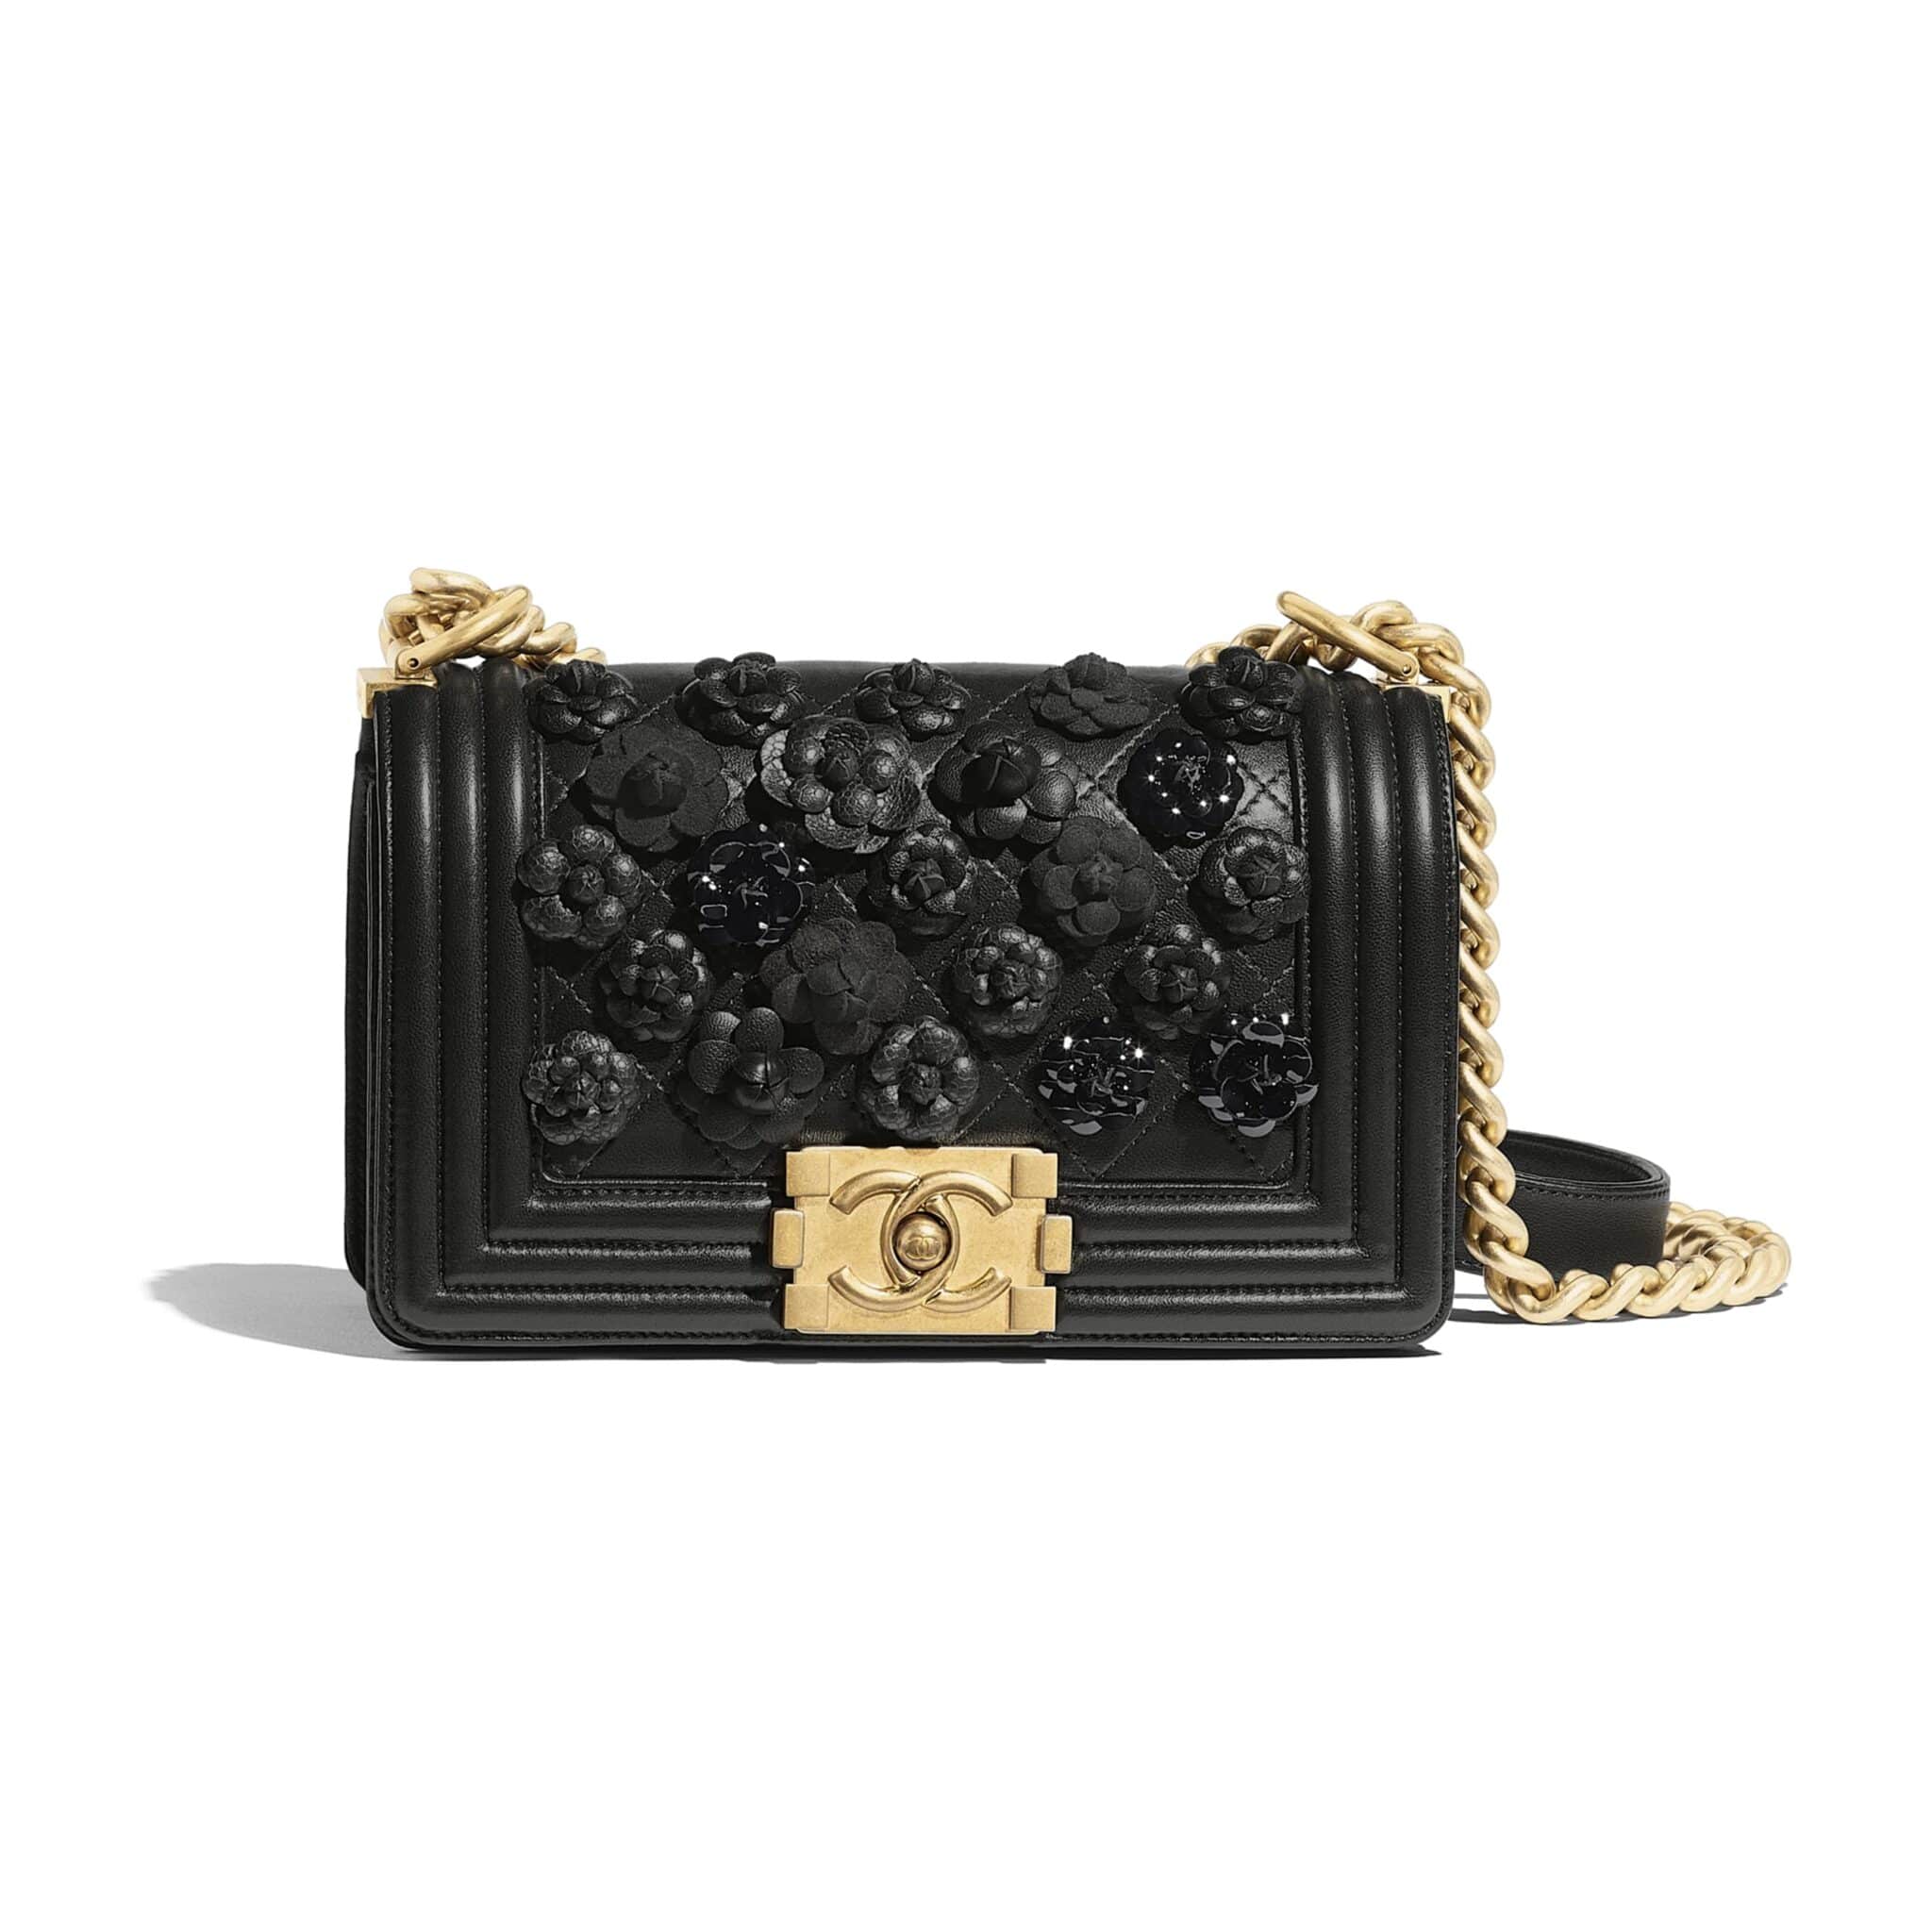 Chanel Bag Price List Reference Guide | Spotted Fashion